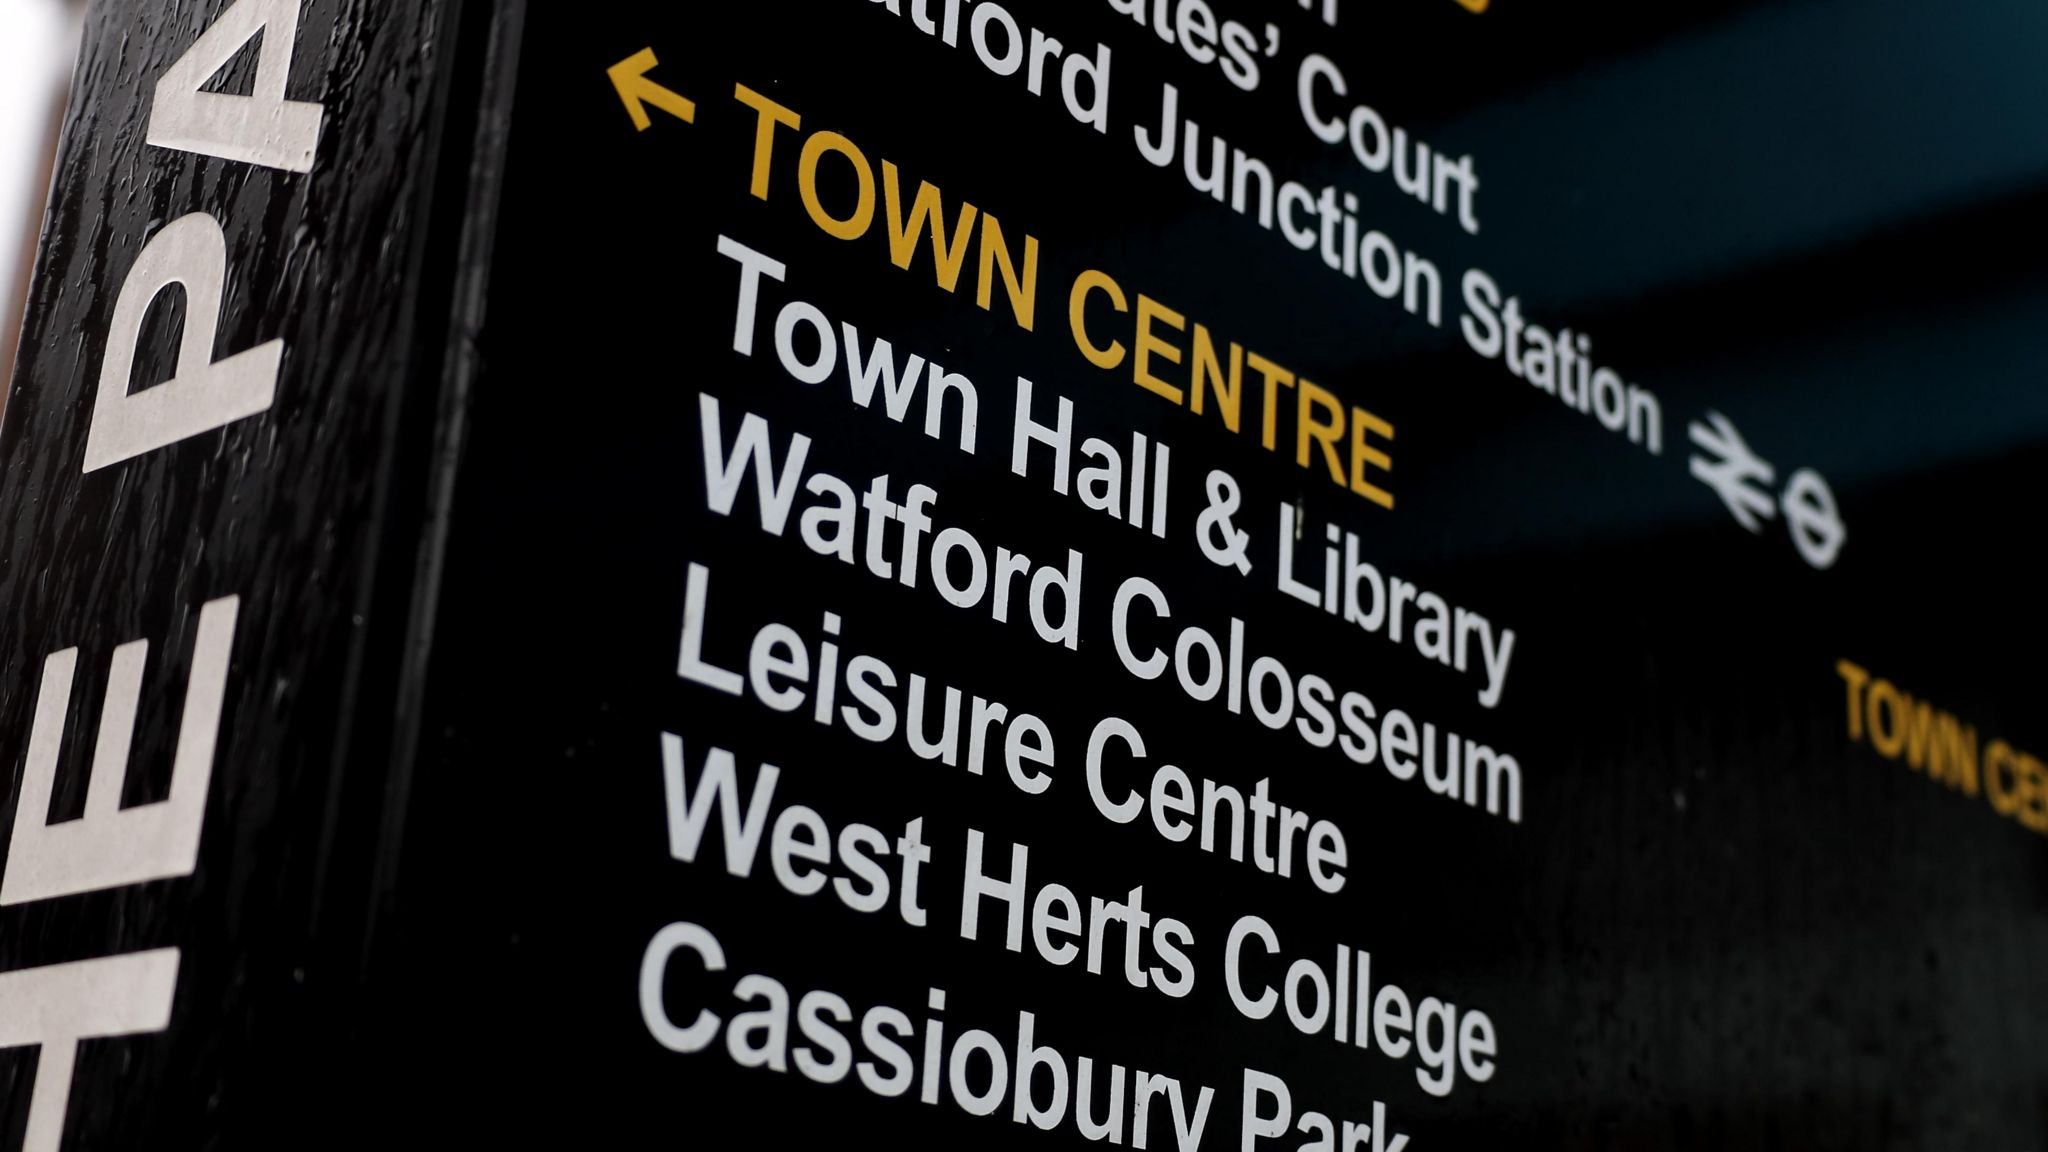 Watford town centre sign